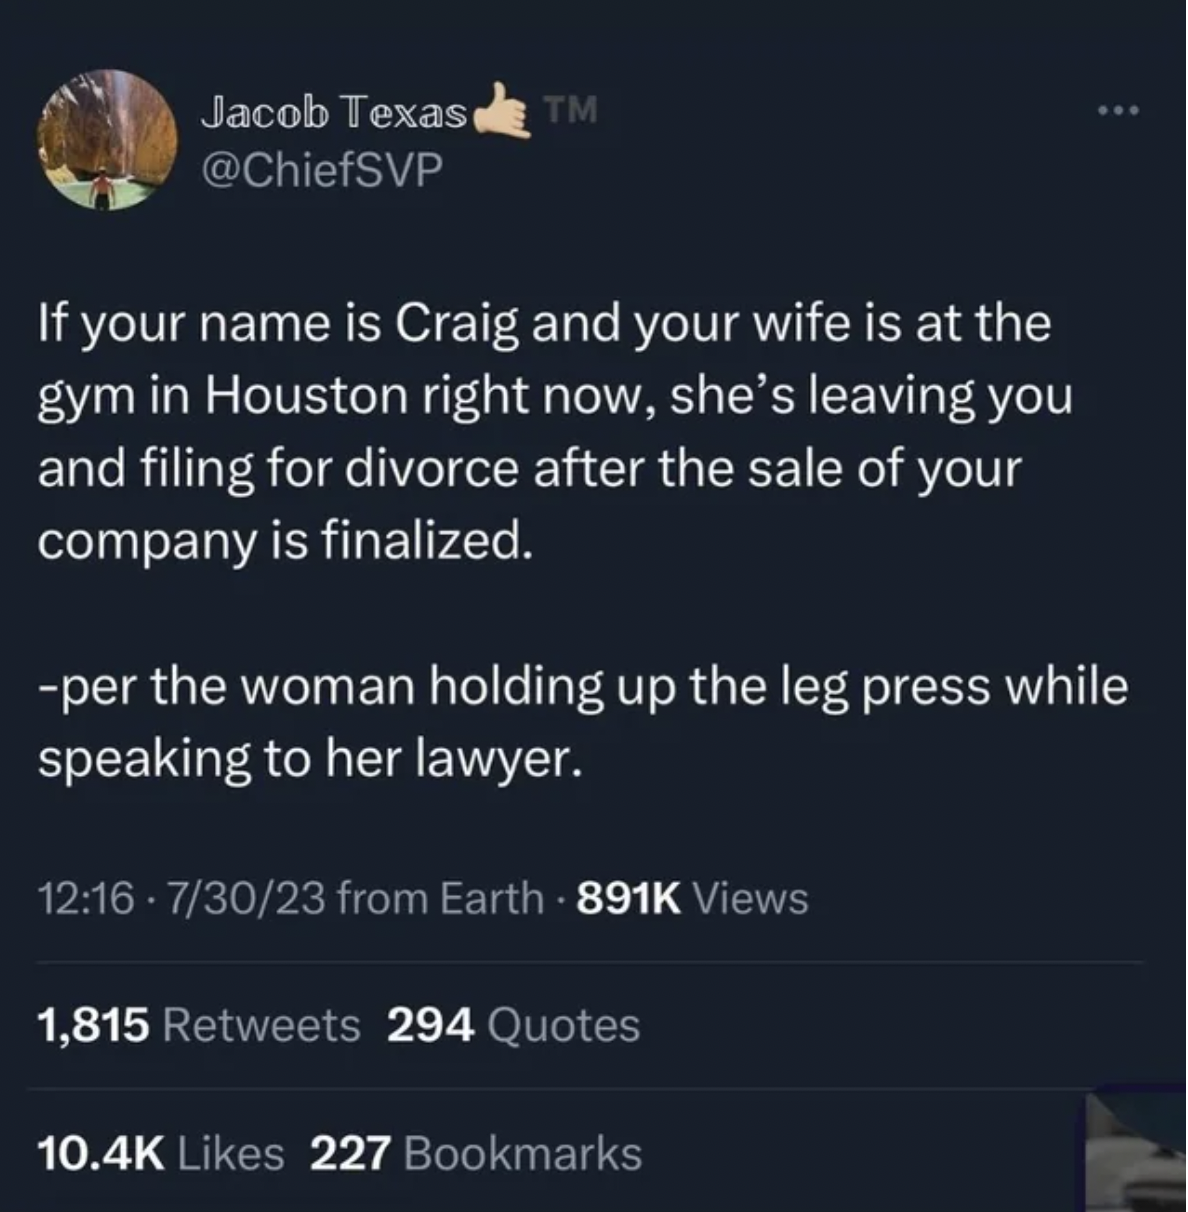 screenshot - Jacob Texas Tm If your name is Craig and your wife is at the gym in Houston right now, she's leaving you and filing for divorce after the sale of your company is finalized. per the woman holding up the leg press while speaking to her lawyer. 